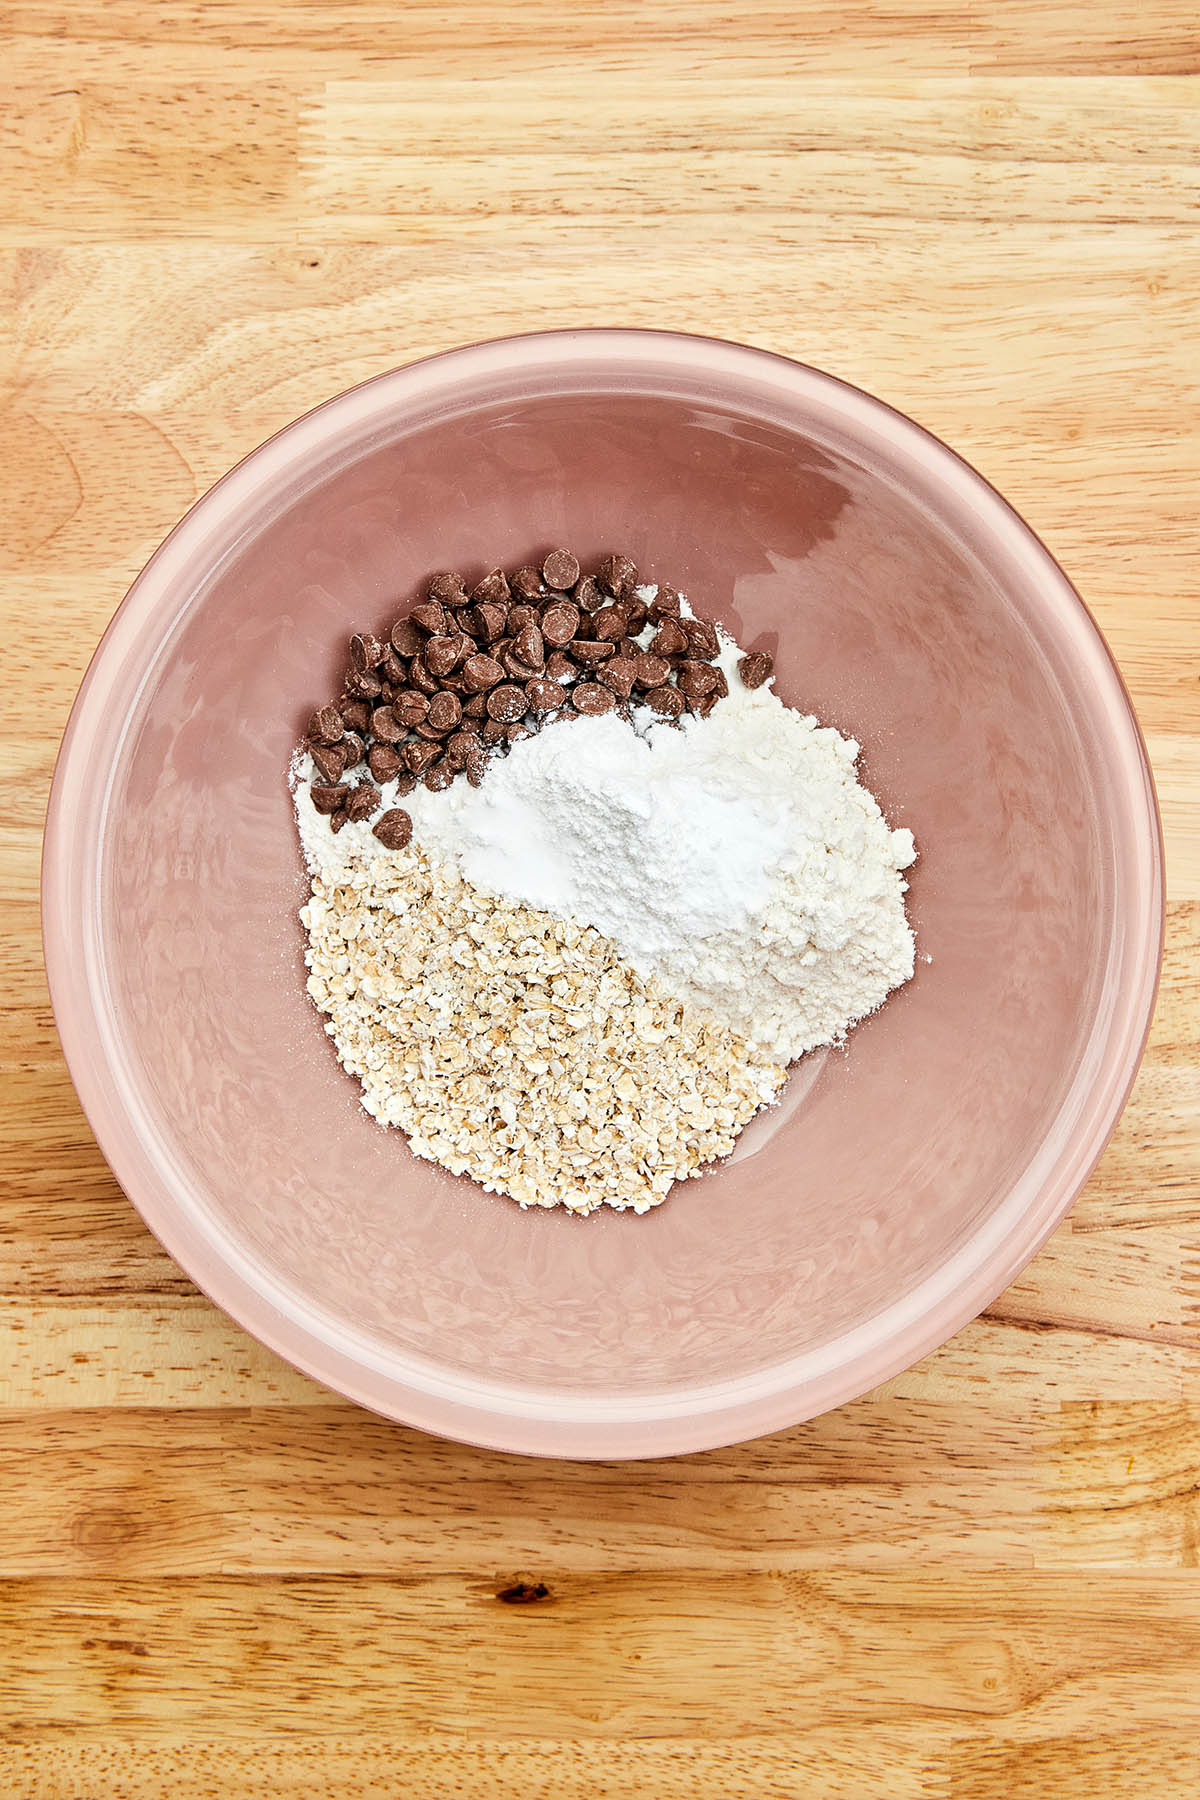 Unmixed dry ingredients in a bowl.